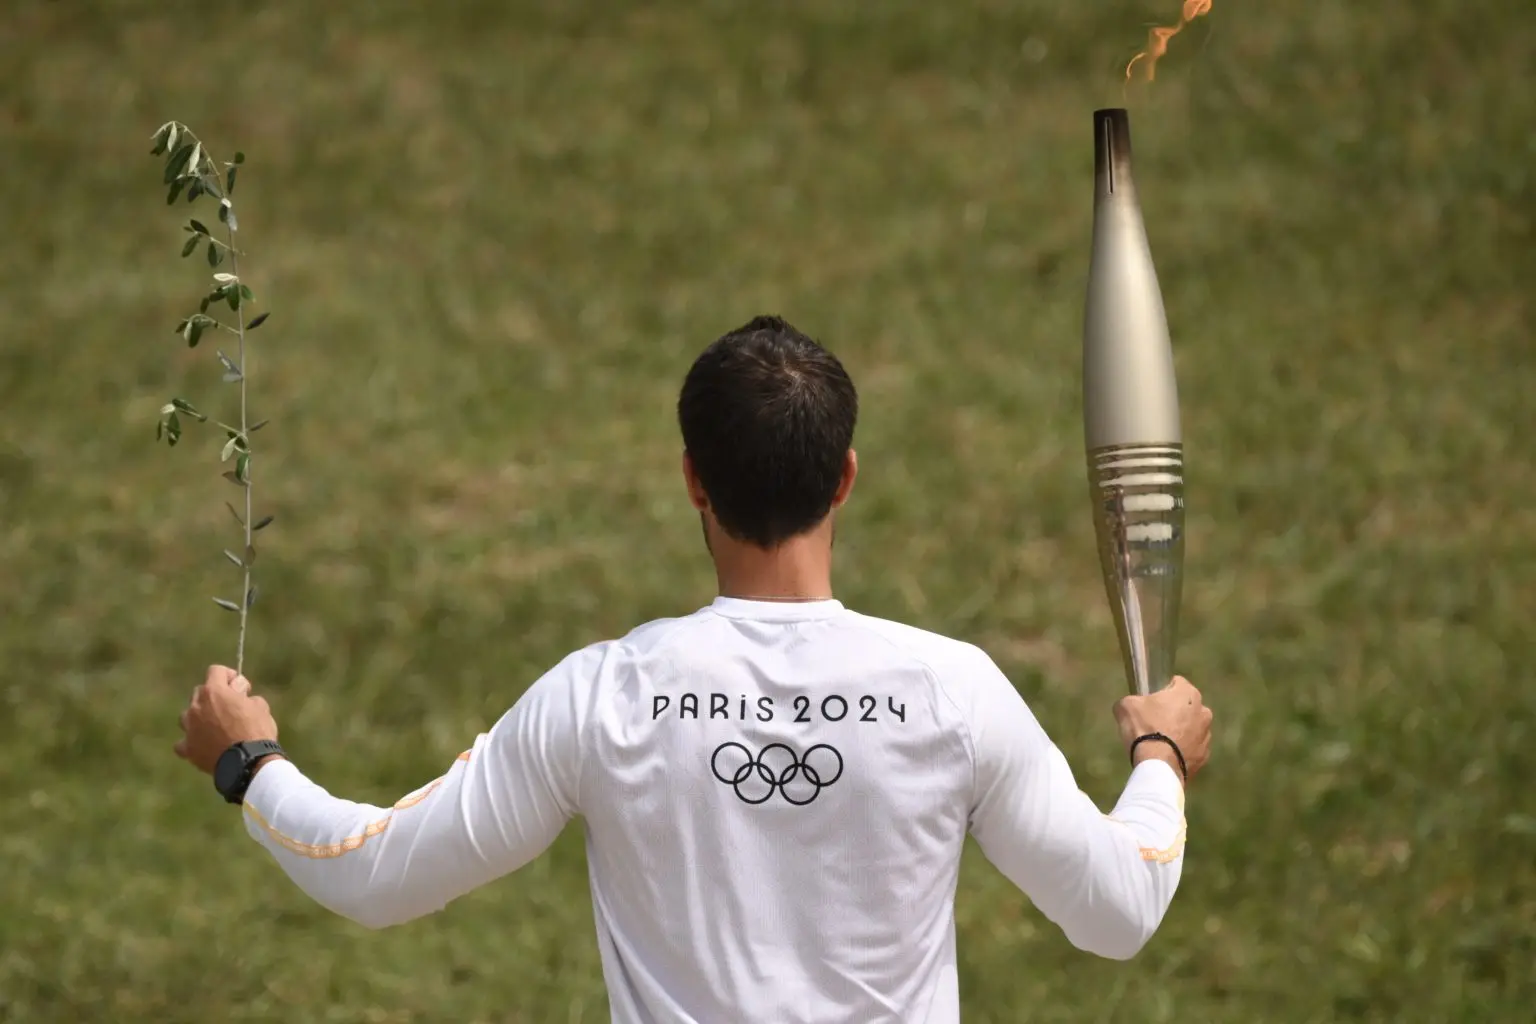 The sacred flame for the Paris 2024 Olympics was lit Tuesday in Olympia, Greece, the birthplace of the ancient Games, in a ceremony